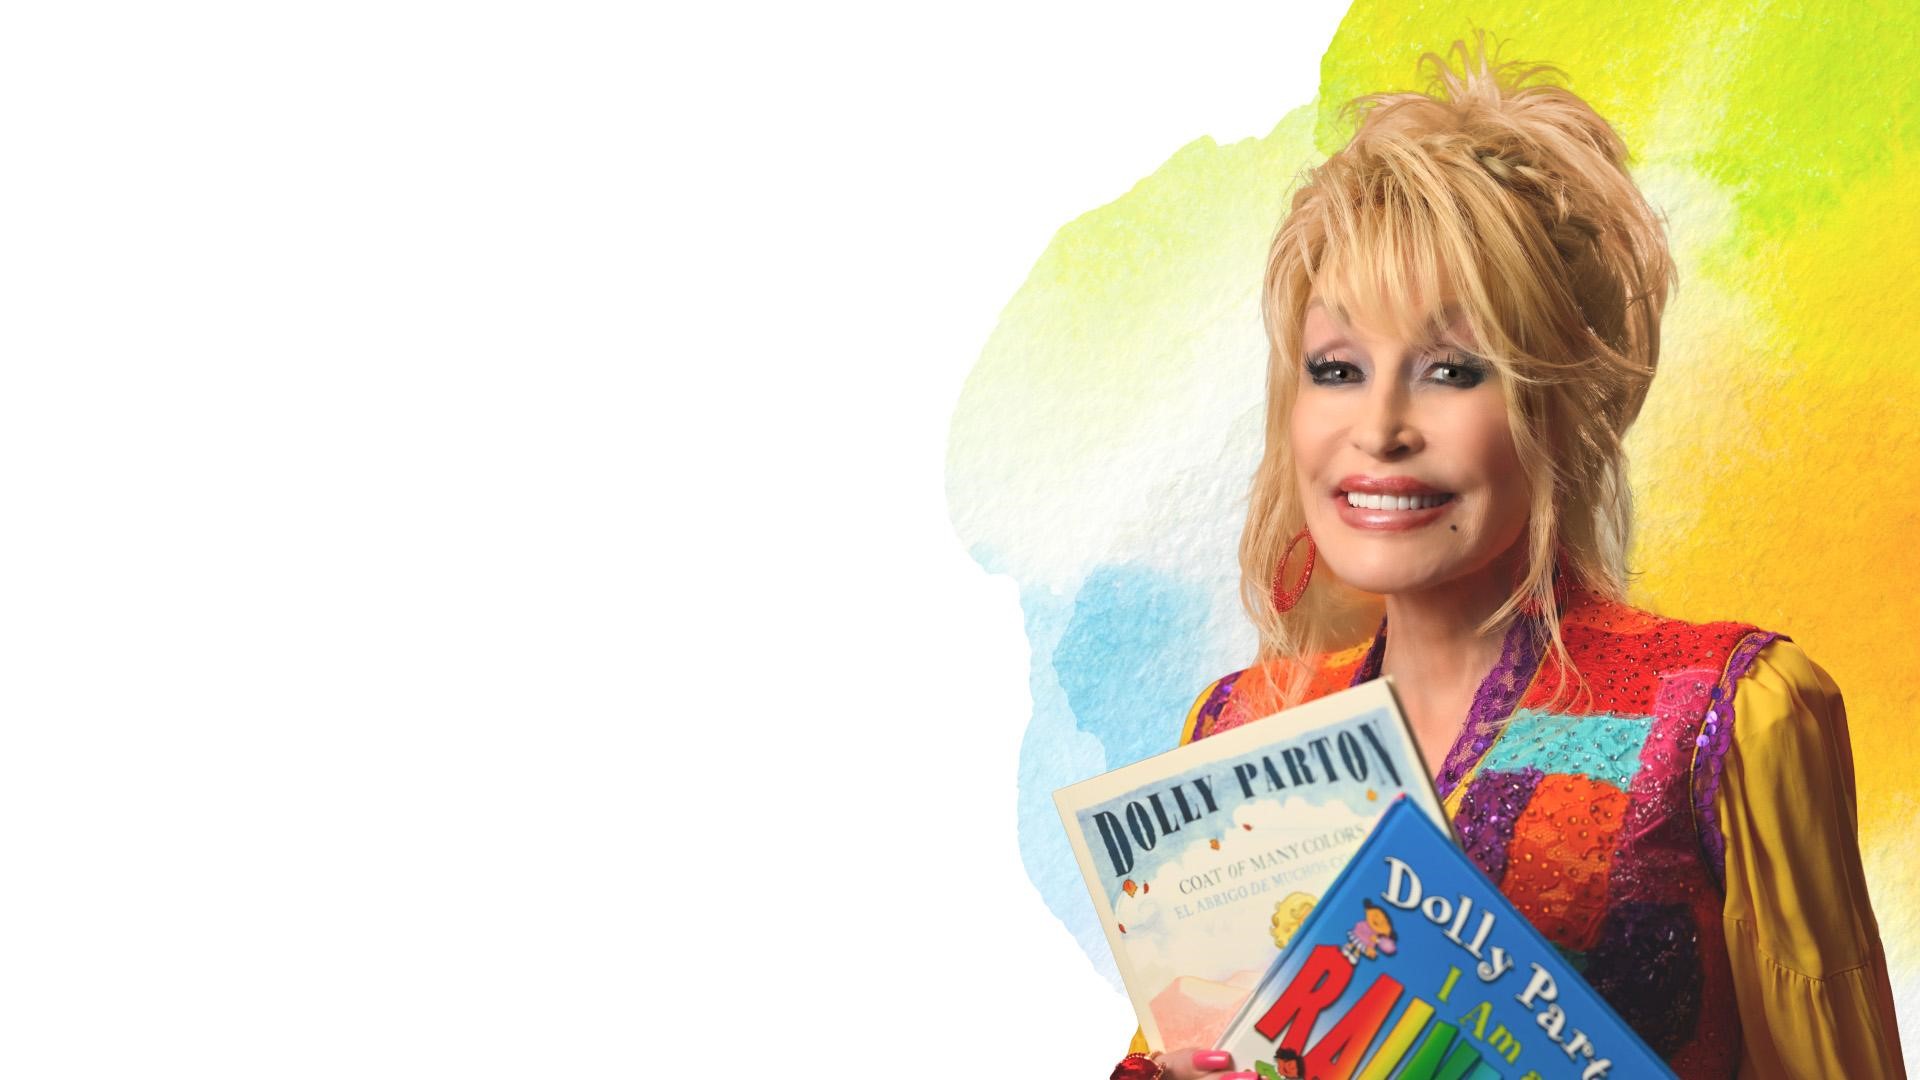 Dolly Parton holding books